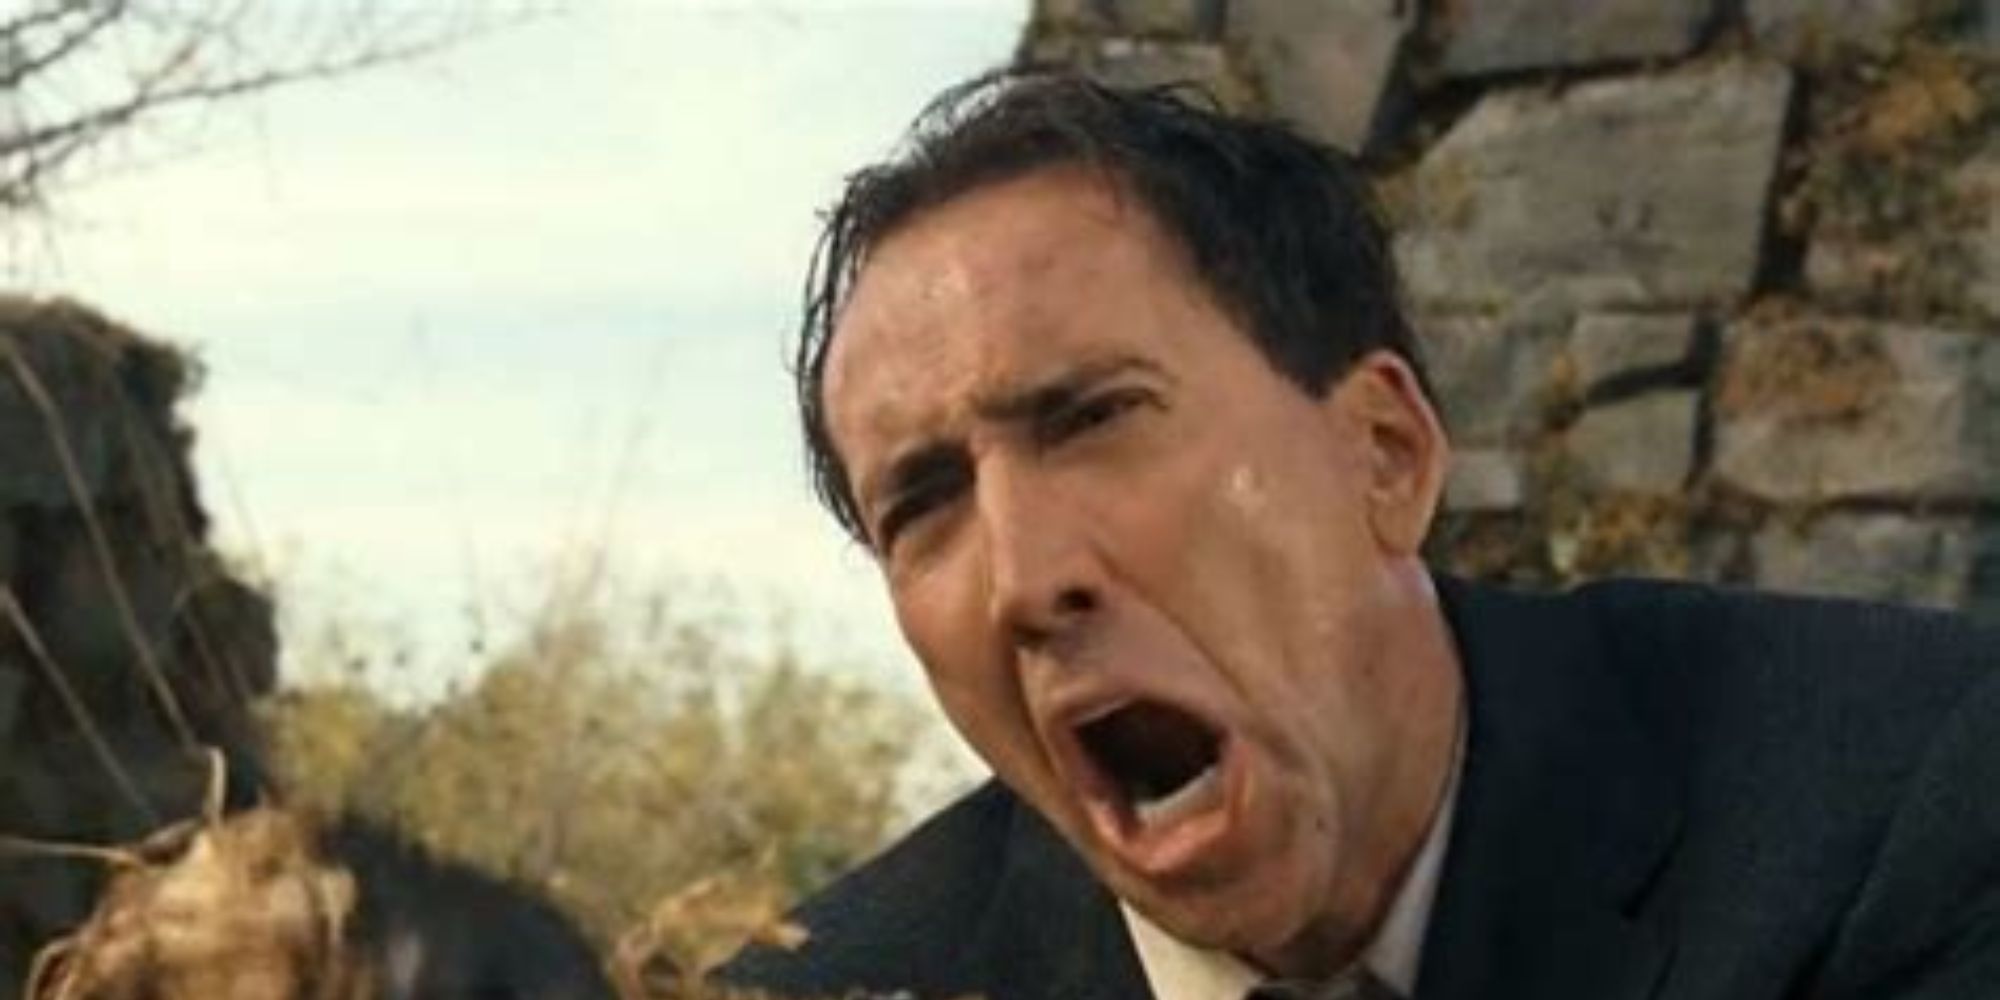 Nick Cage in The Wicker Man